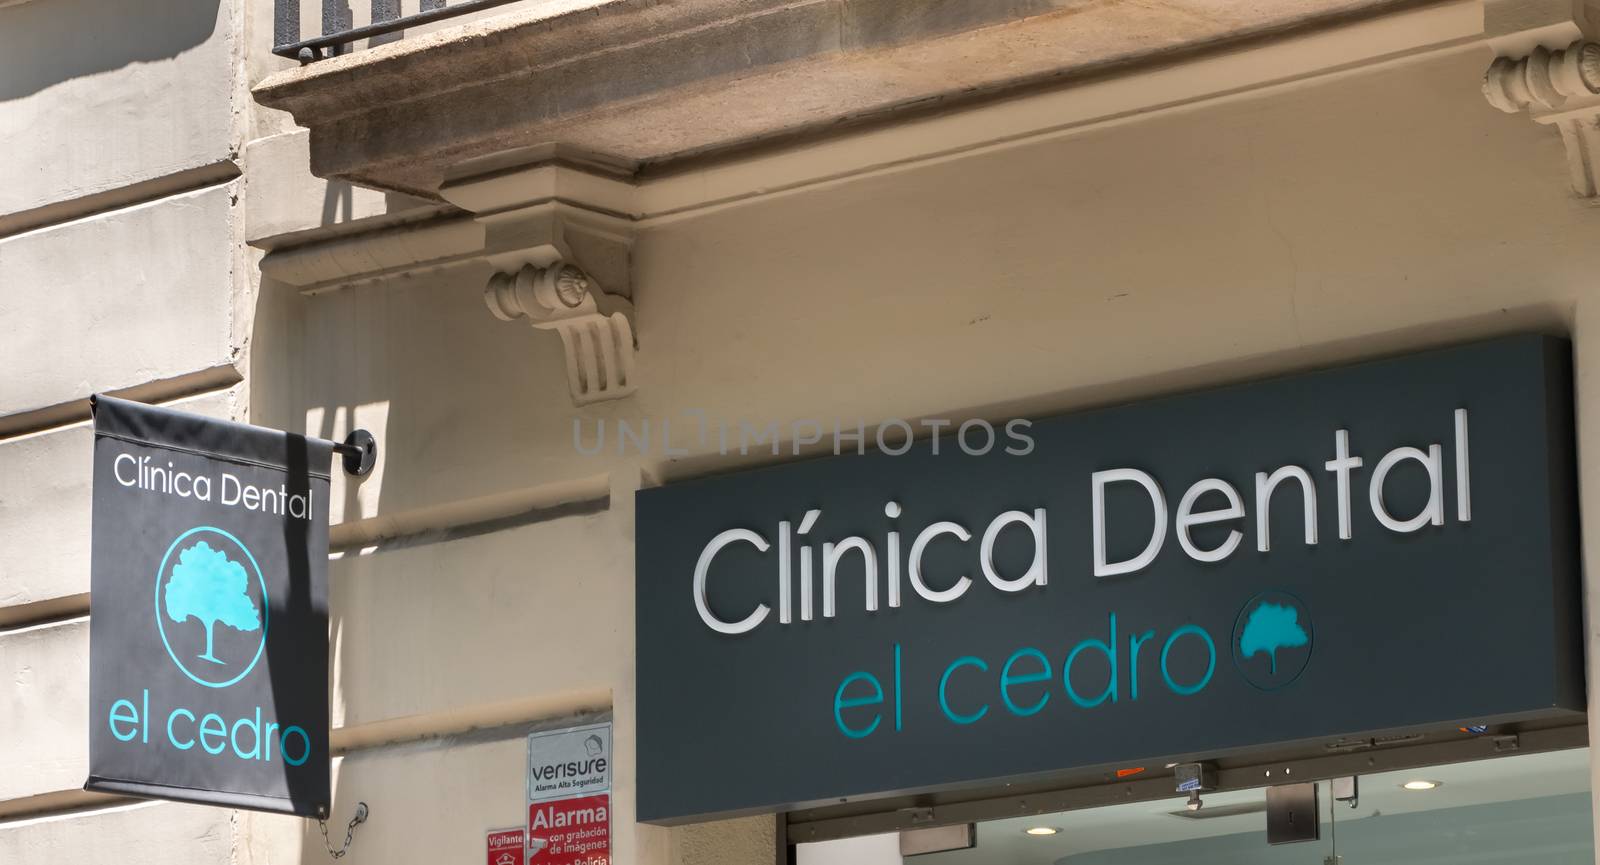 Barcelona, Spain - June 21, 2017: facade of the El Cedro dental clinic in the city center on a summer day